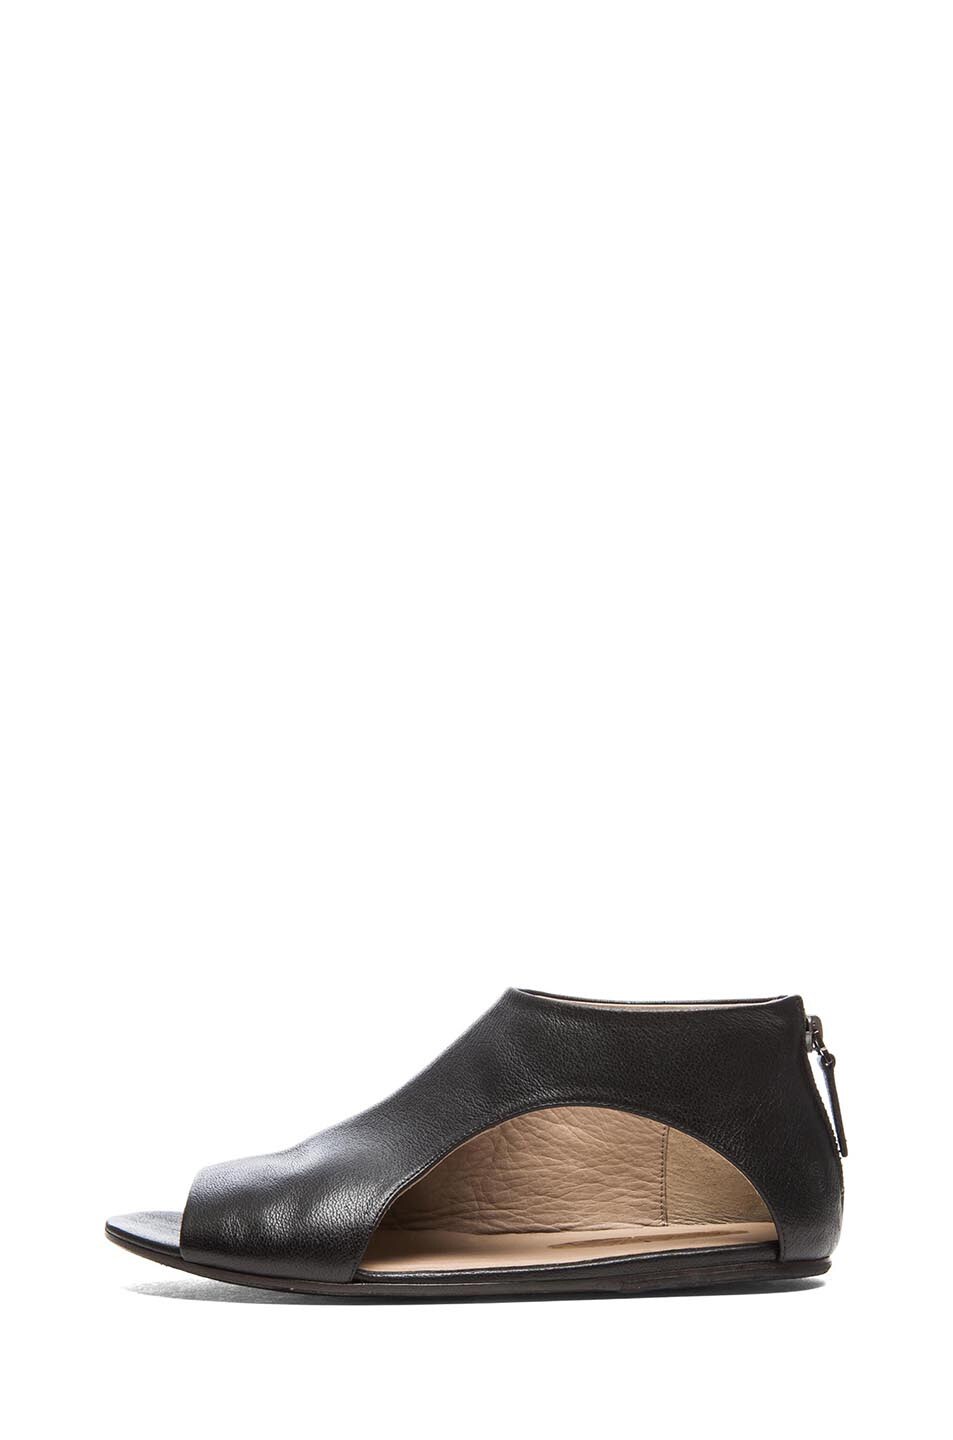 Image 1 of Marsell Arsella Leather Sandals in Black